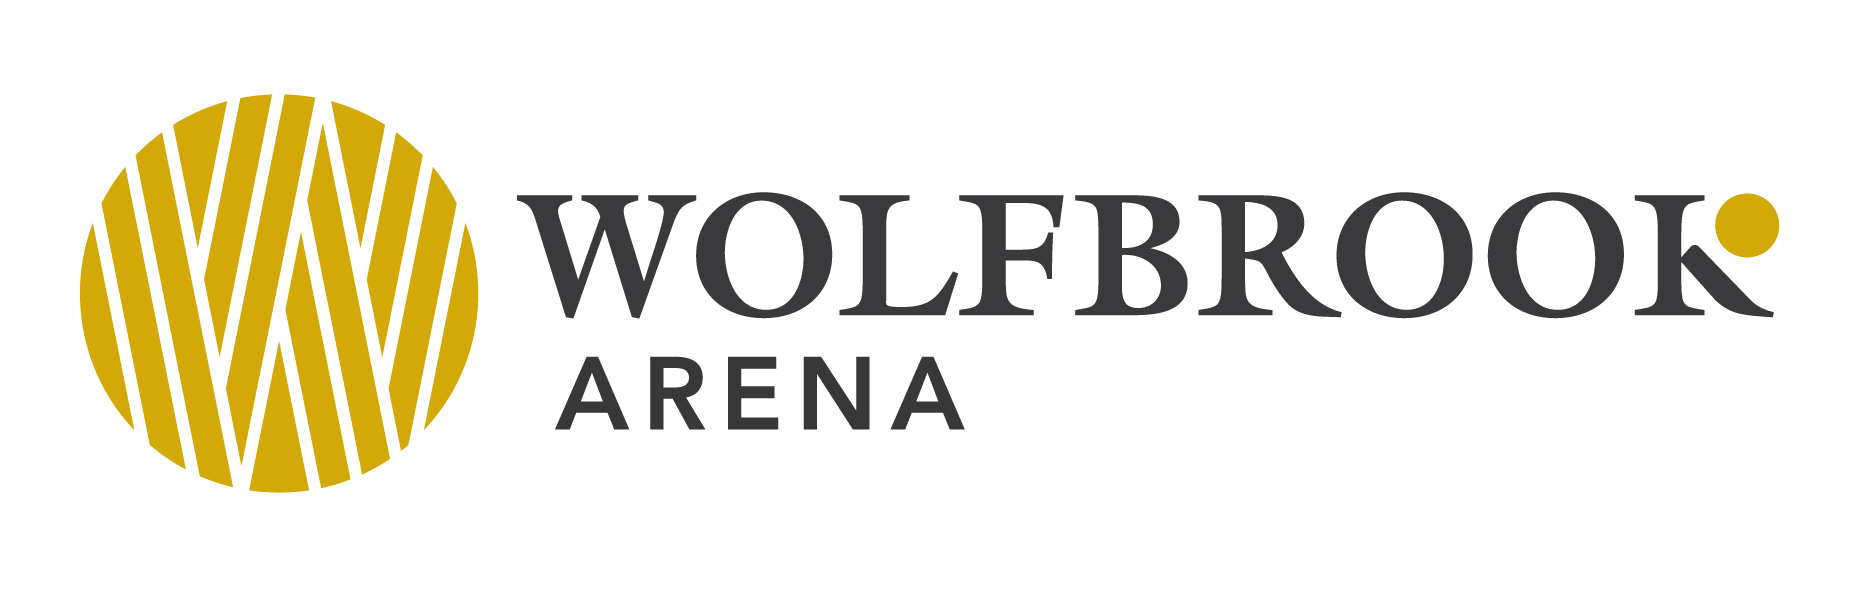 
Wolfbrook Arena